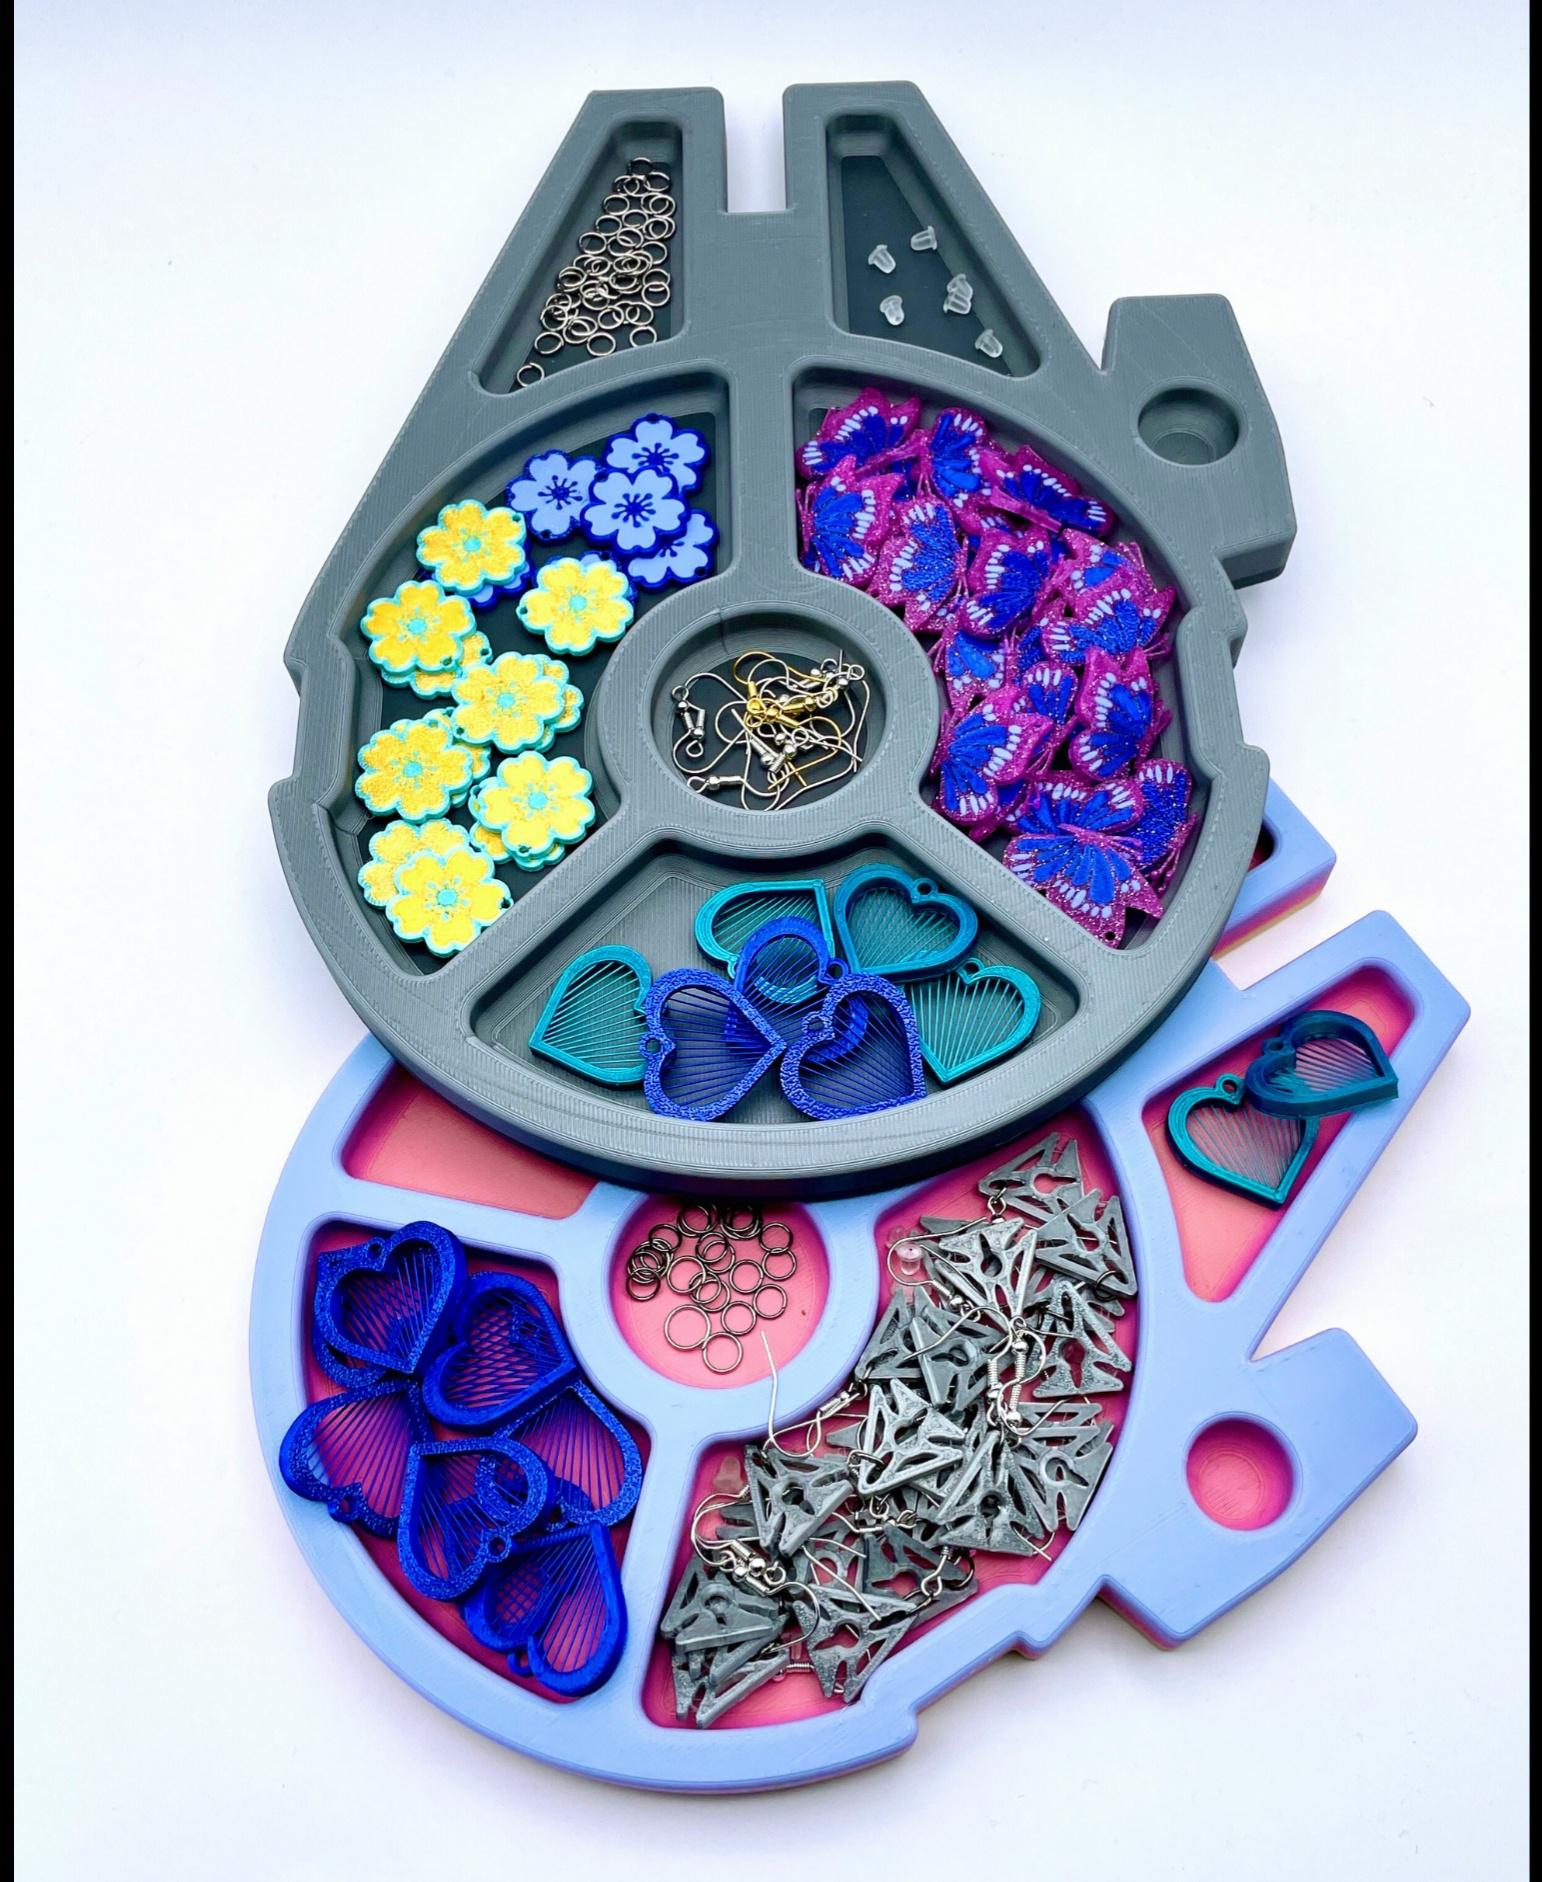 Millennium Falcon Storage Tray - Great for earring making!! Polymaker Metallic Silver and Pastel Rainbow  - 3d model